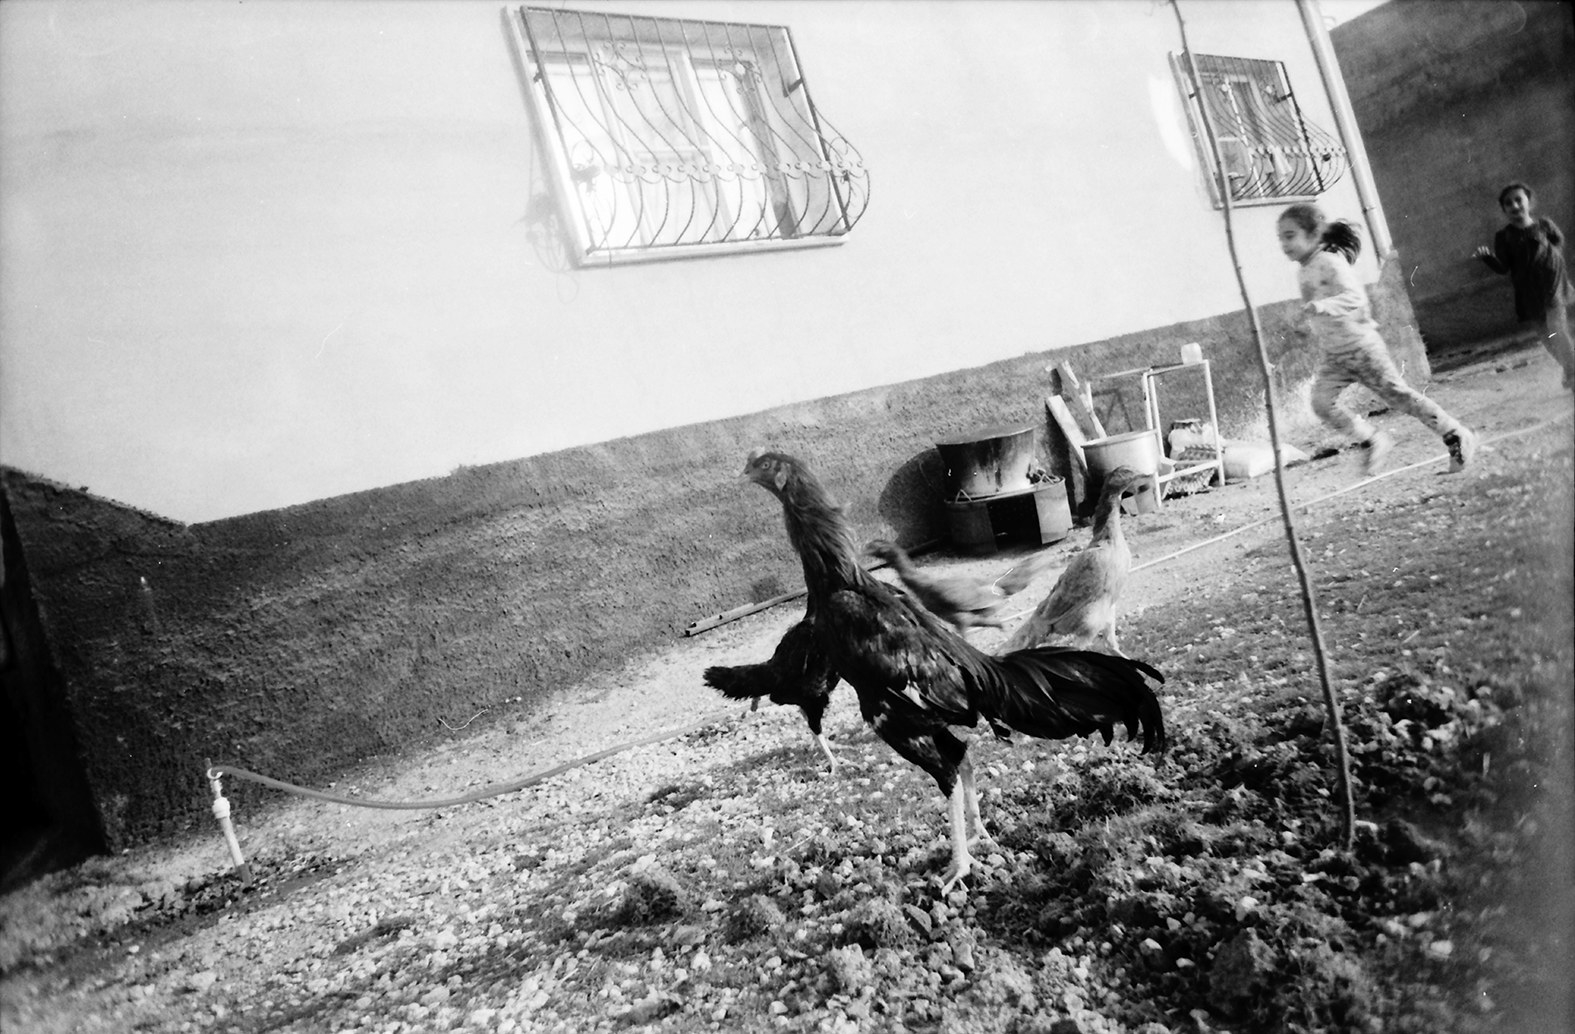 A young girl and boy run through a yard next to a house with chickens in the foreground 